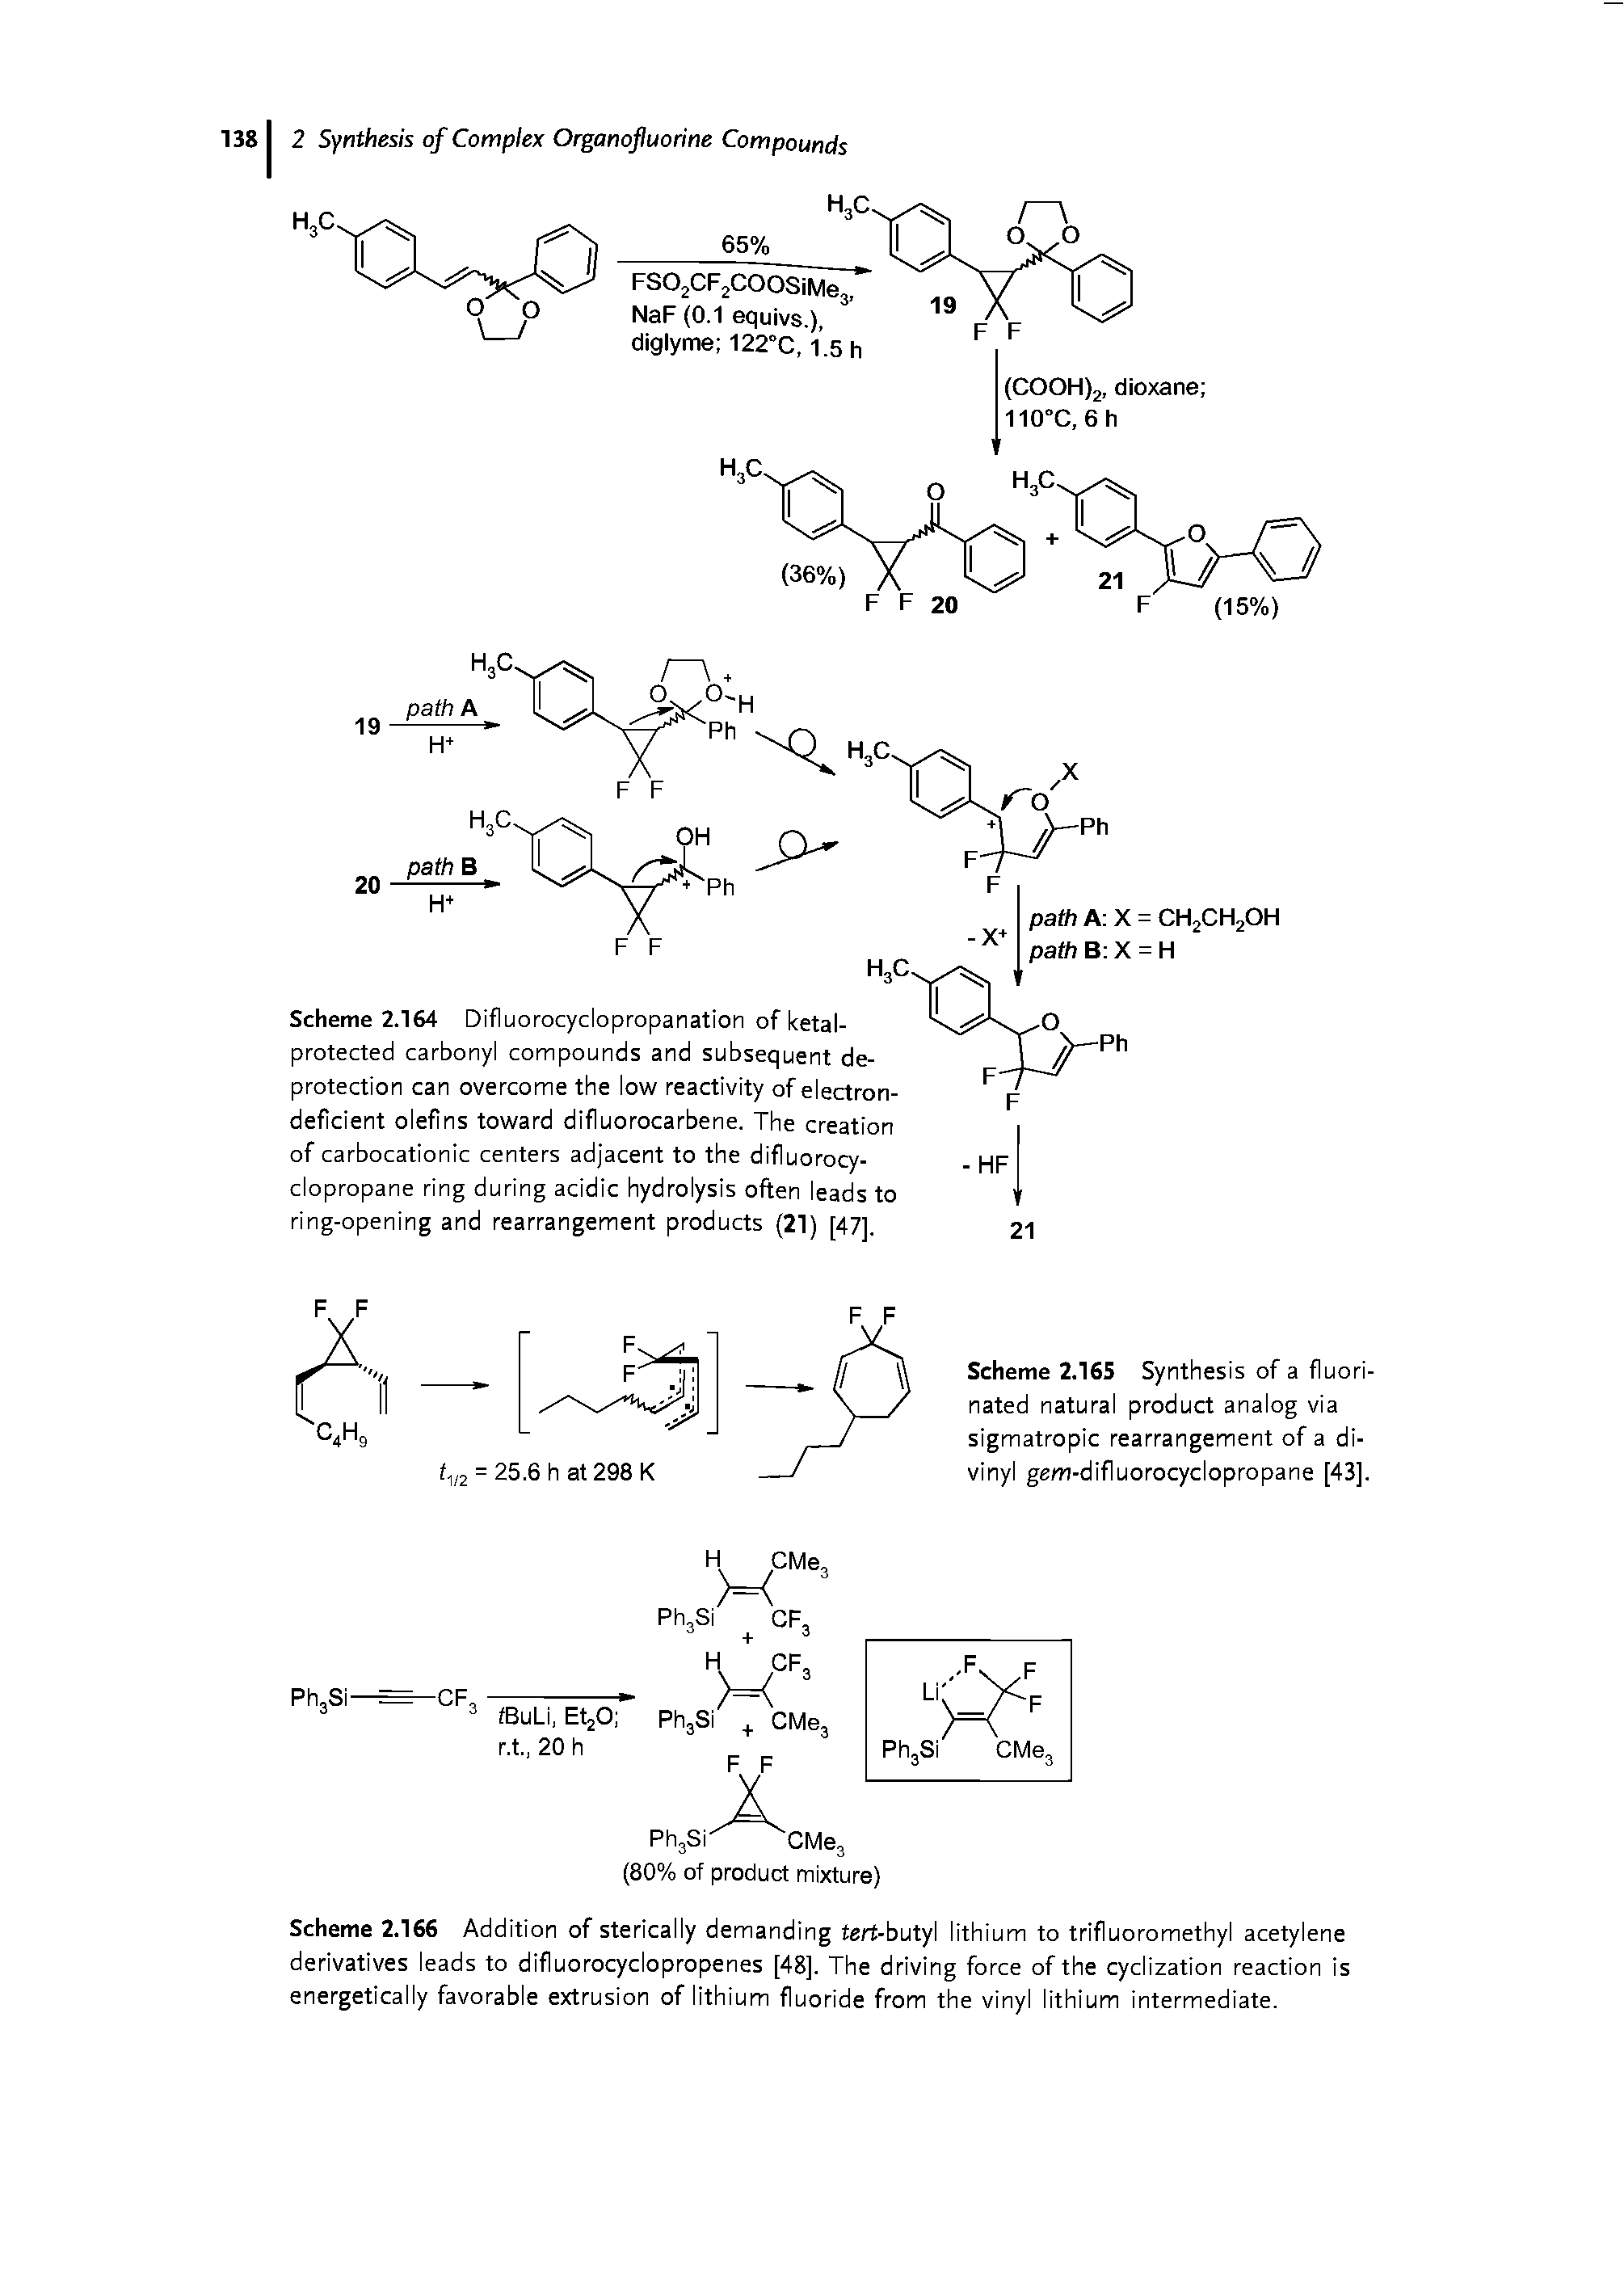 Scheme 2.166 Addition of sterically demanding tert-butyl lithium to trifluoromethyl acetylene derivatives leads to difluorocyclopropenes [48]. The driving force of the cyclization reaction is energetically favorable extrusion of lithium fluoride from the vinyl lithium intermediate.